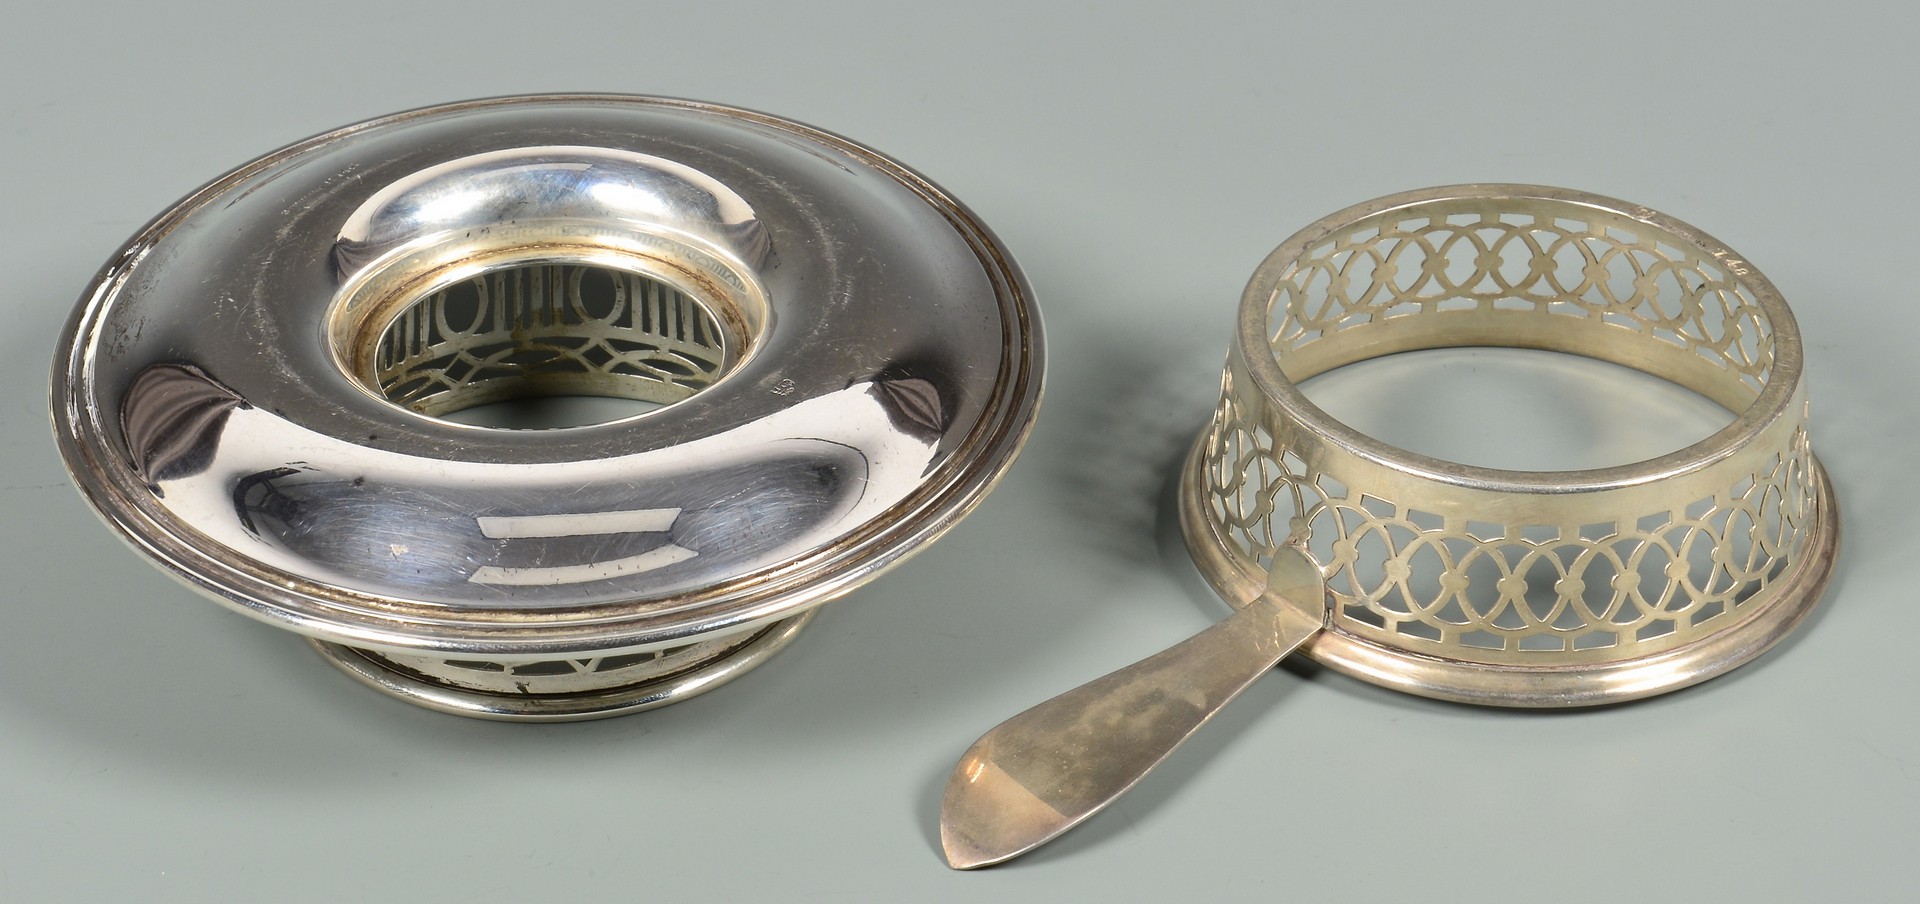 Lot 338: 15 Sterling Cup Holders w/ Porcelain Liners